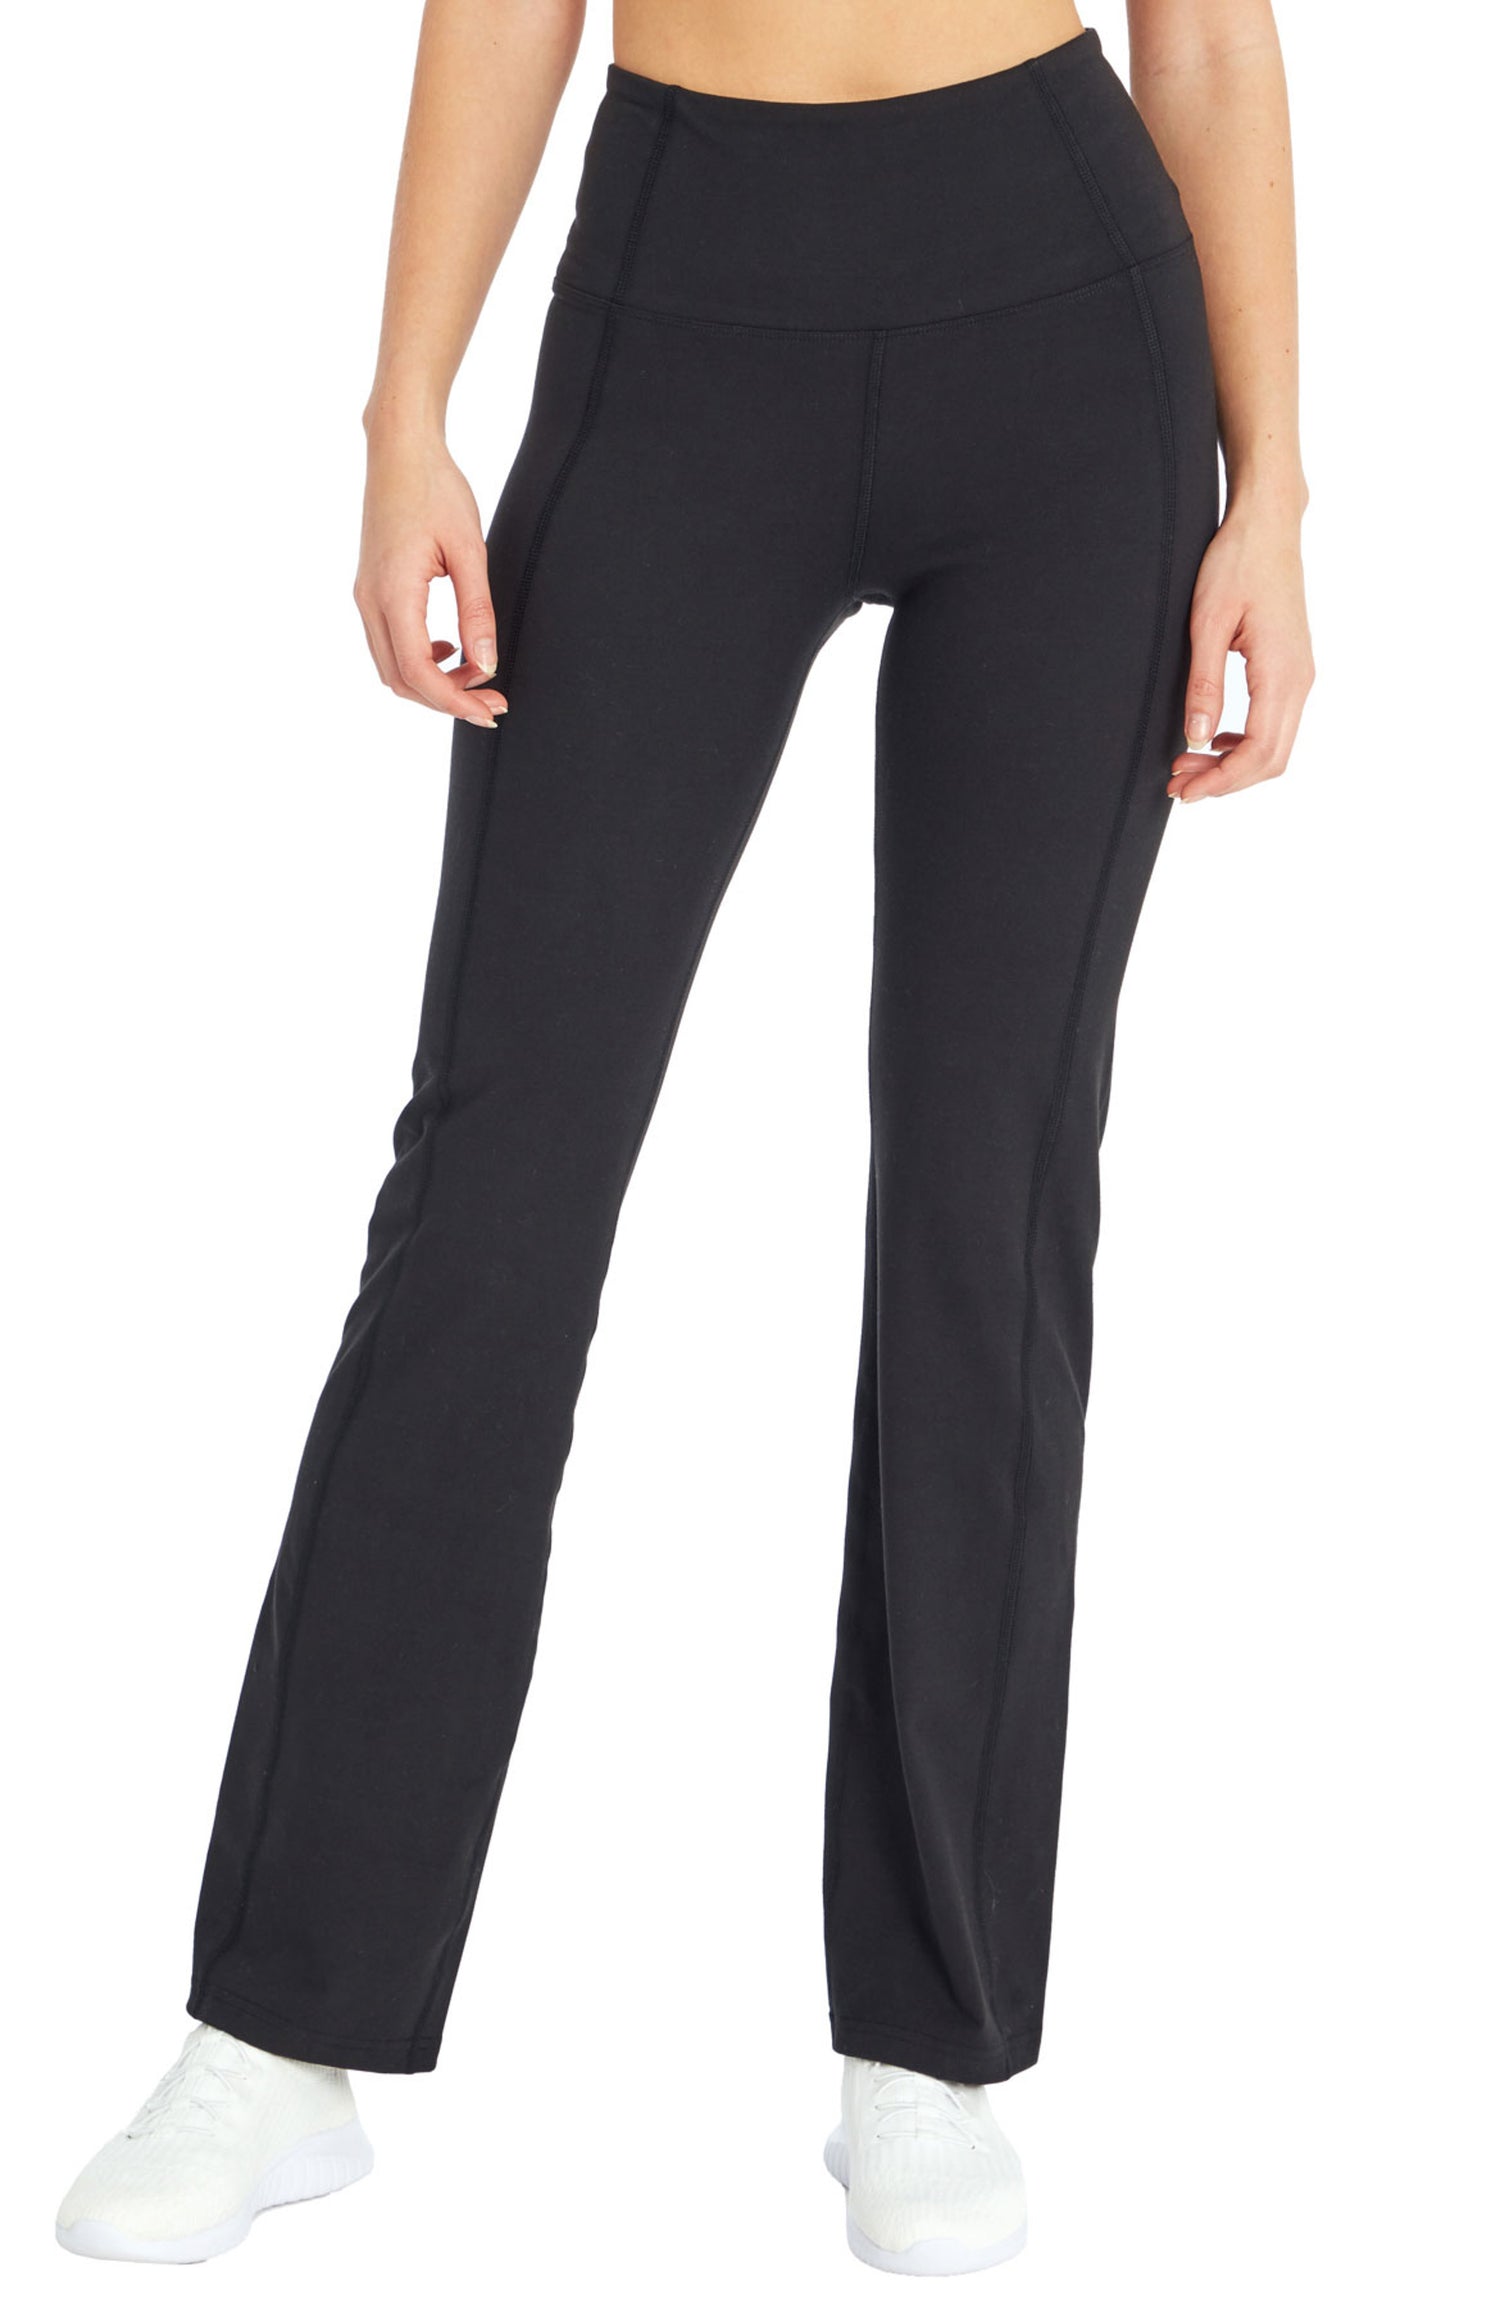 Women's Low-Rise Bootcut Yoga Pants with Pockets Stretch Slim